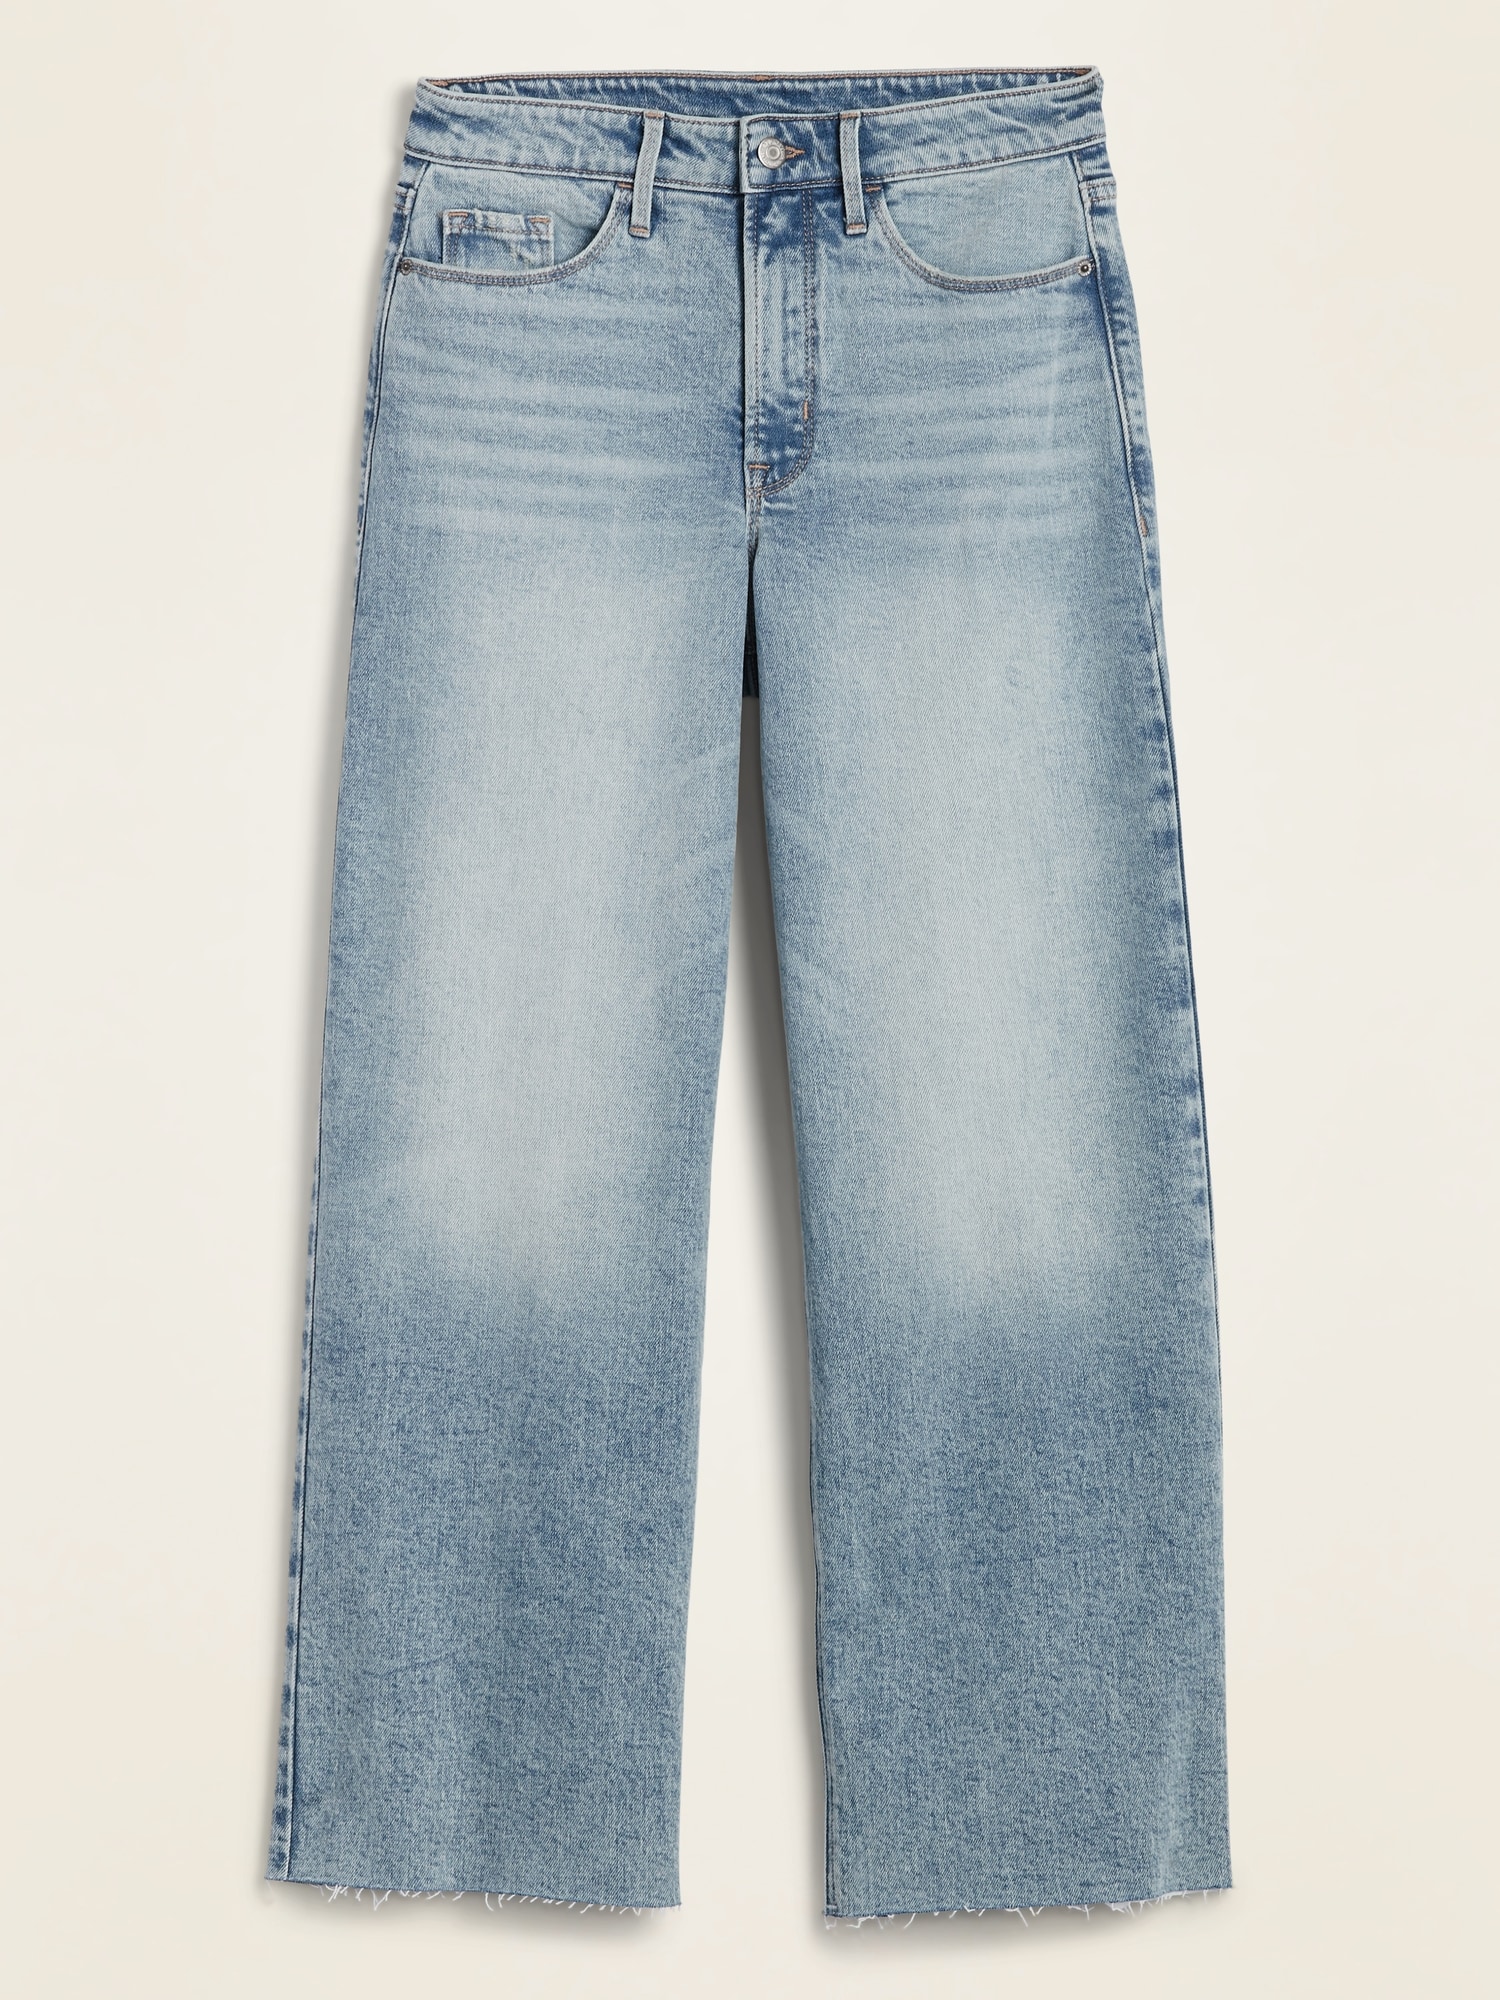 Extra High-Waisted Wide-Leg Raw-Hem Jeans for Women | Old Navy